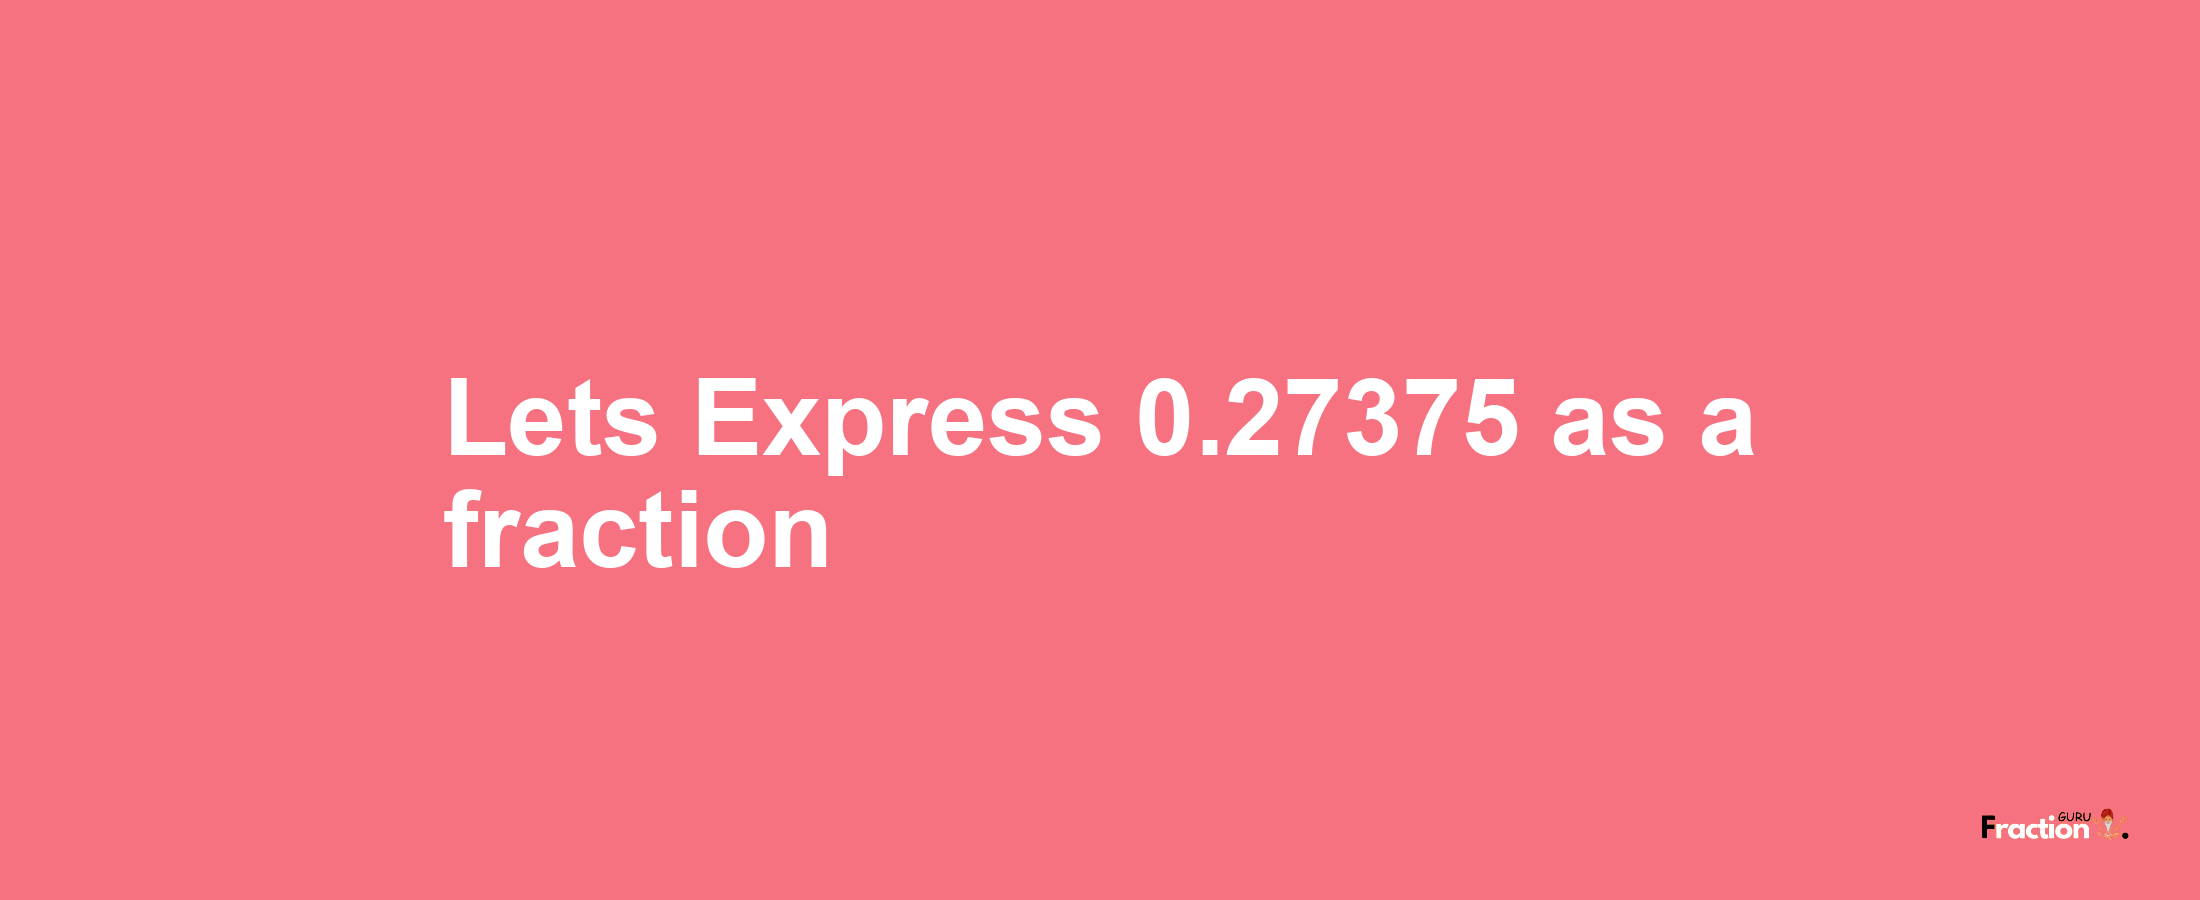 Lets Express 0.27375 as afraction